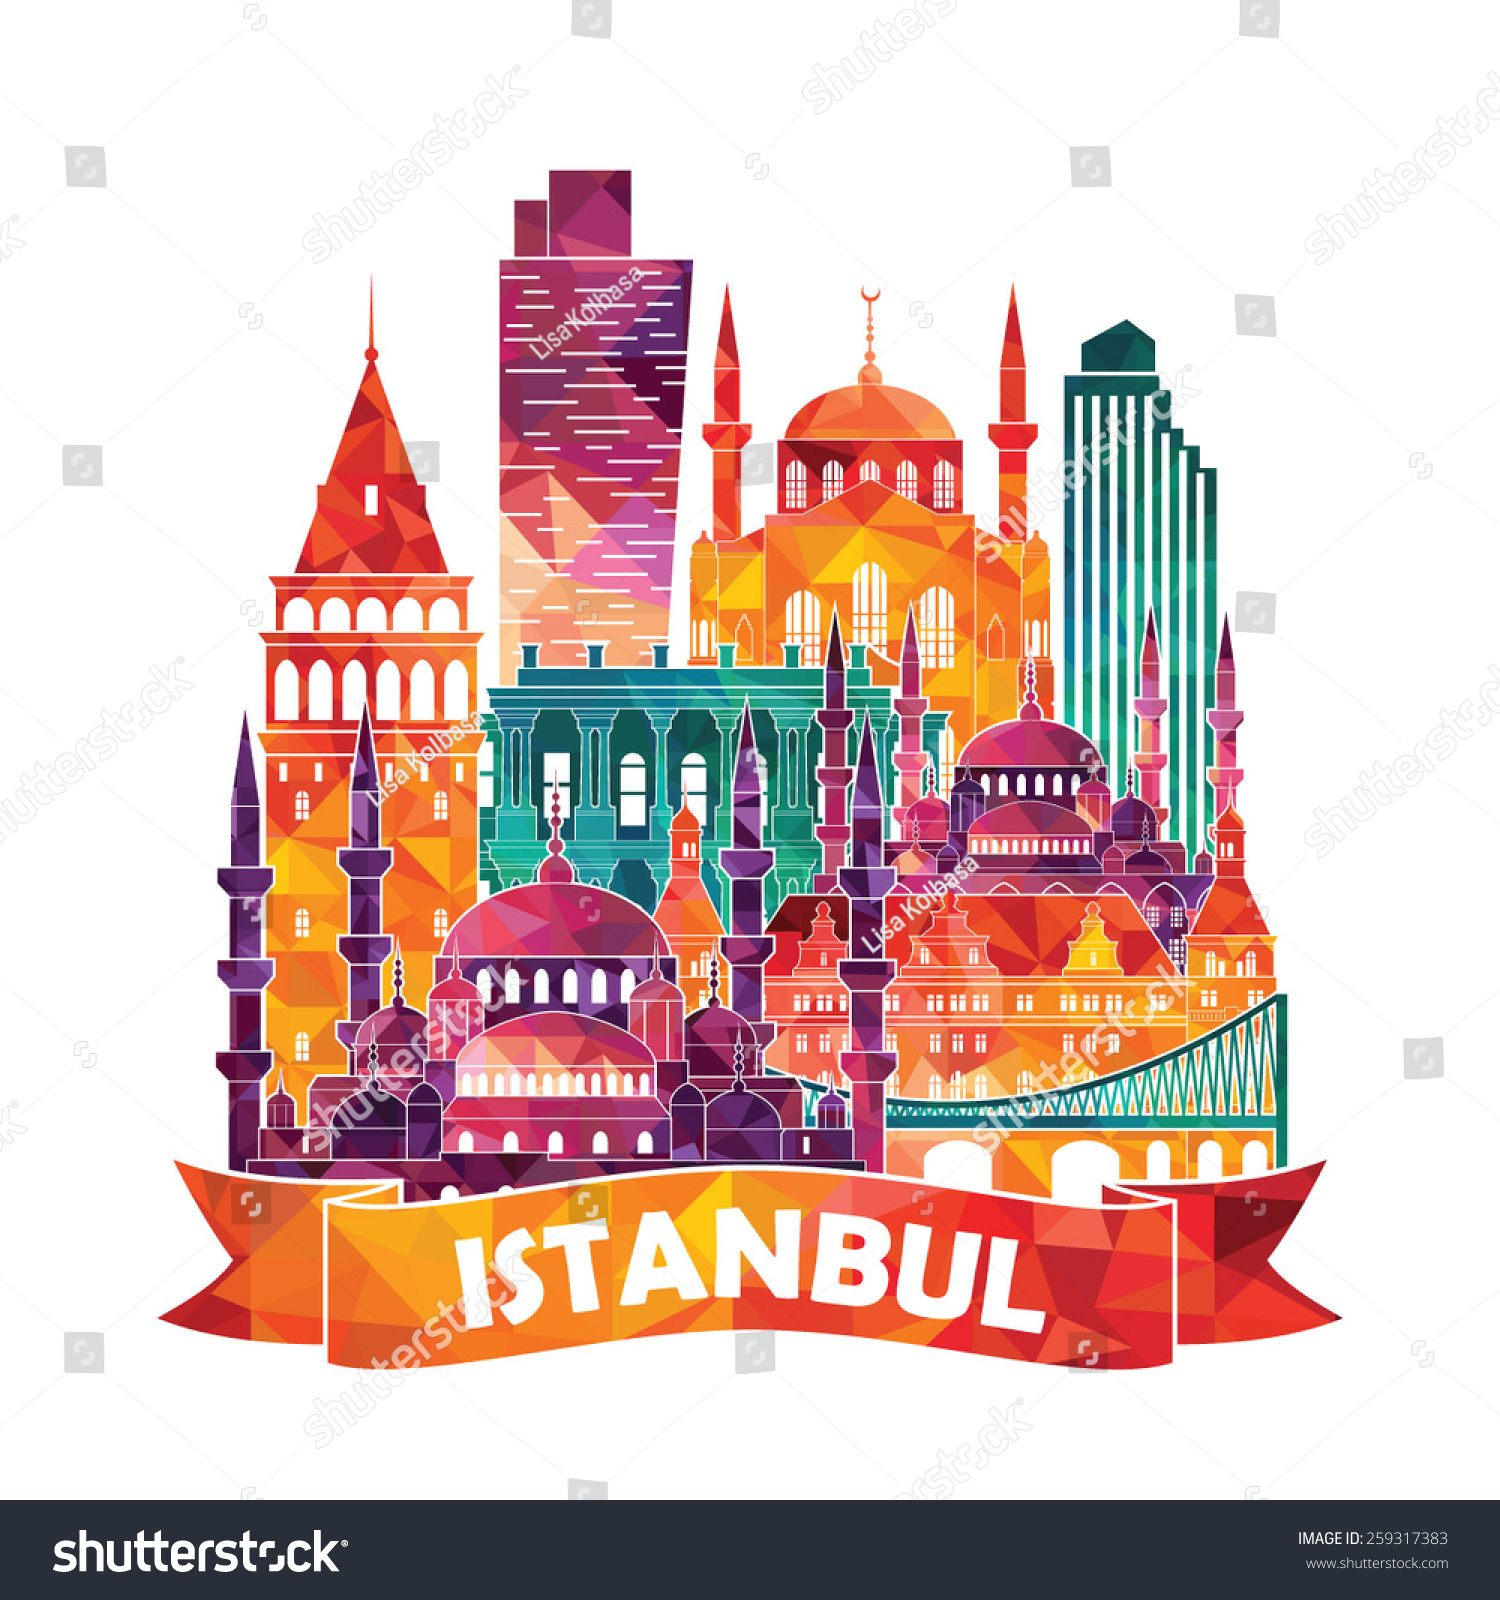 Istanbul Detailed Silhouette Vector Illustration Stock ...